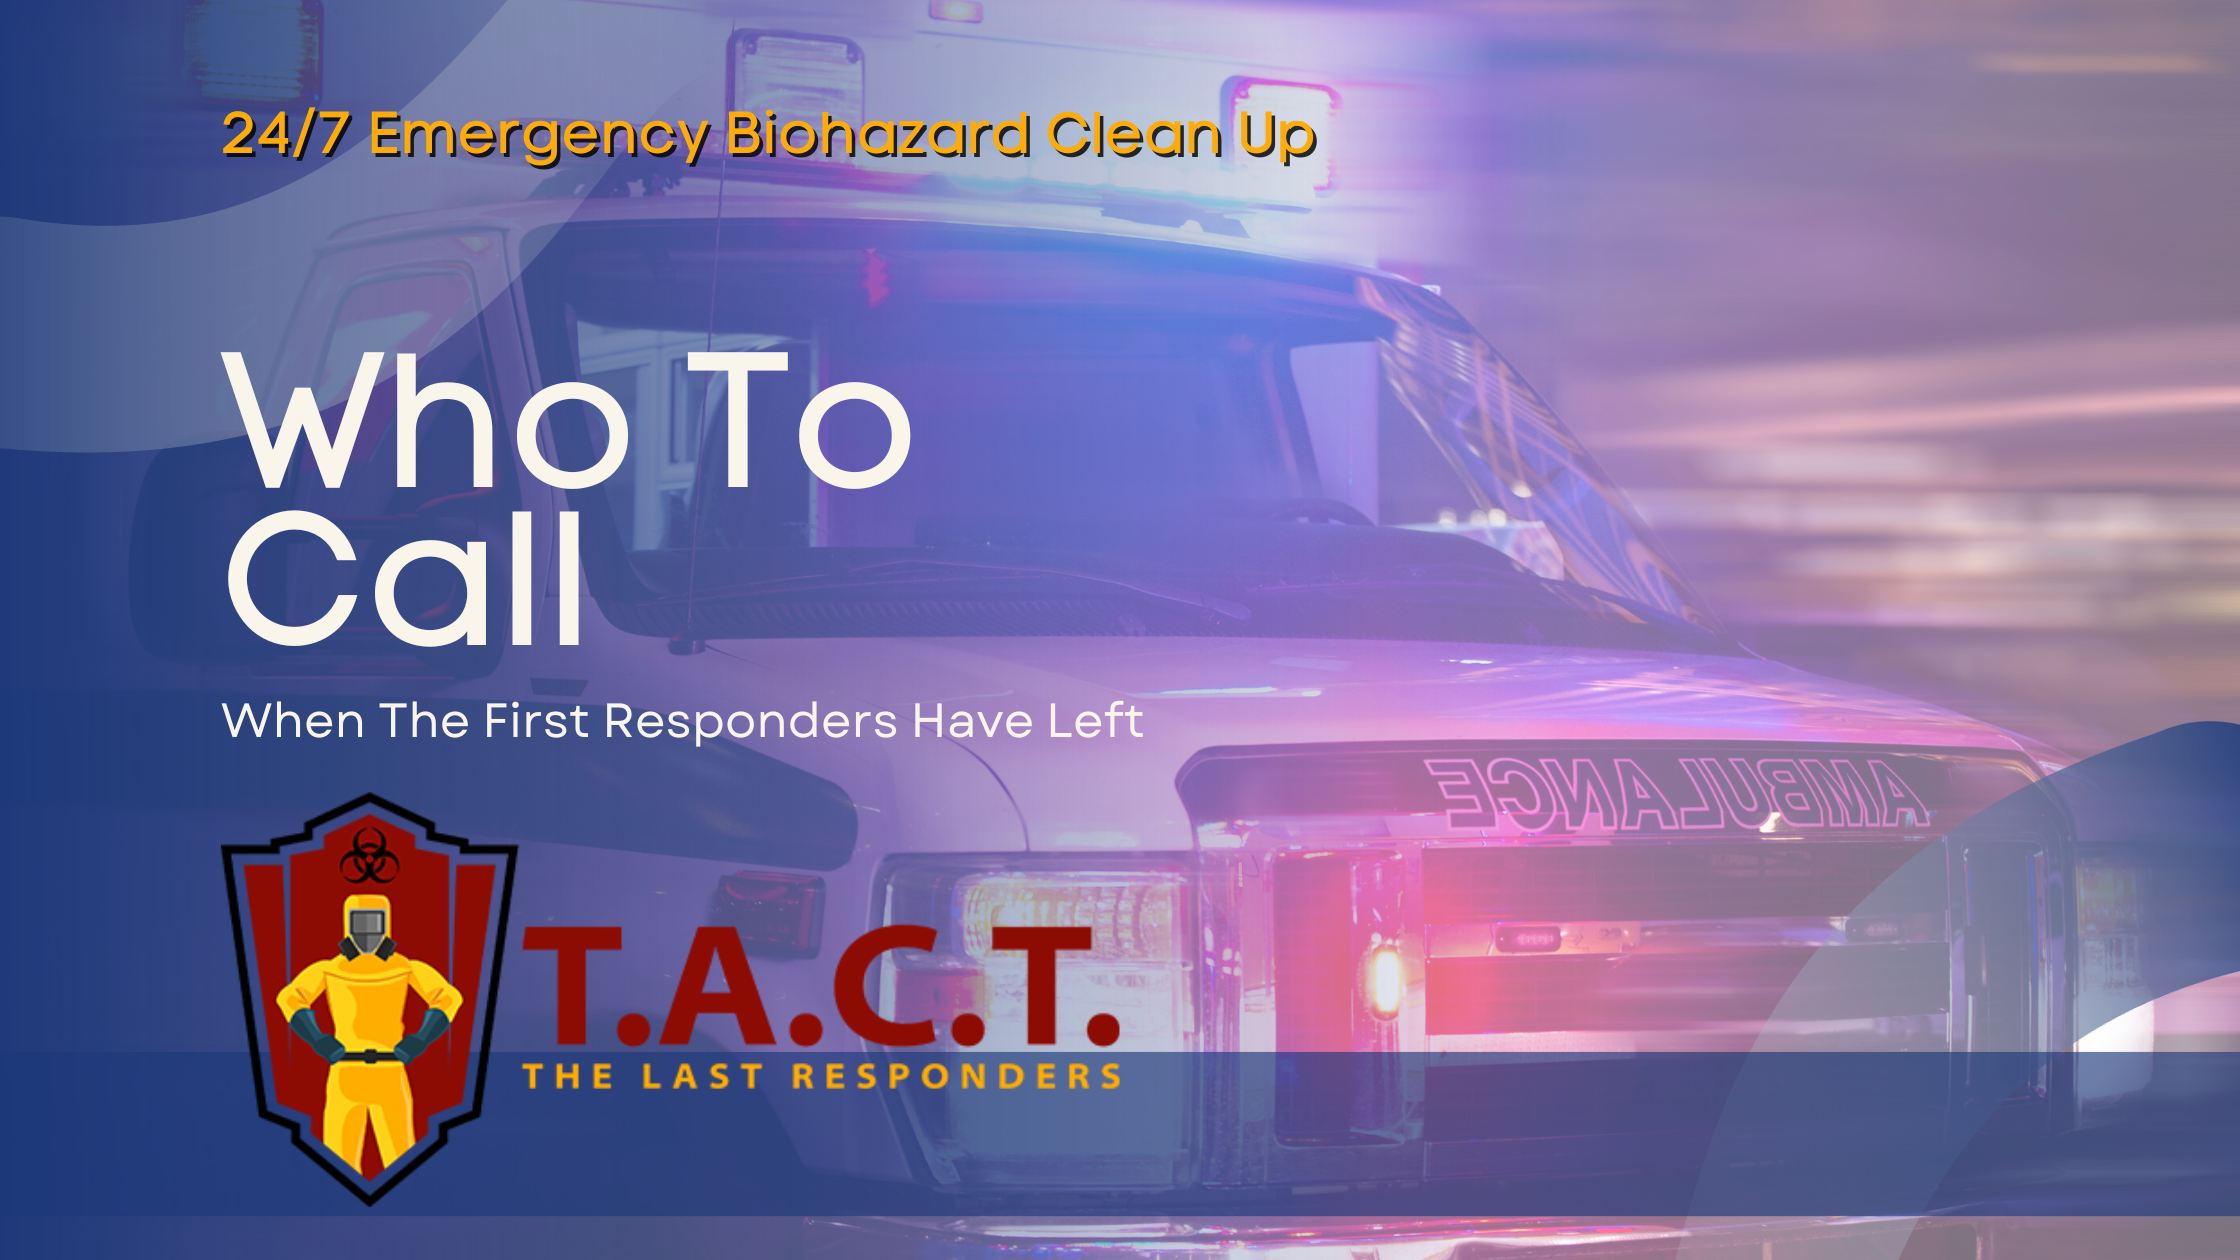 Need Biohazard Cleanup? T.A.C.T. Detroit Has You Covered